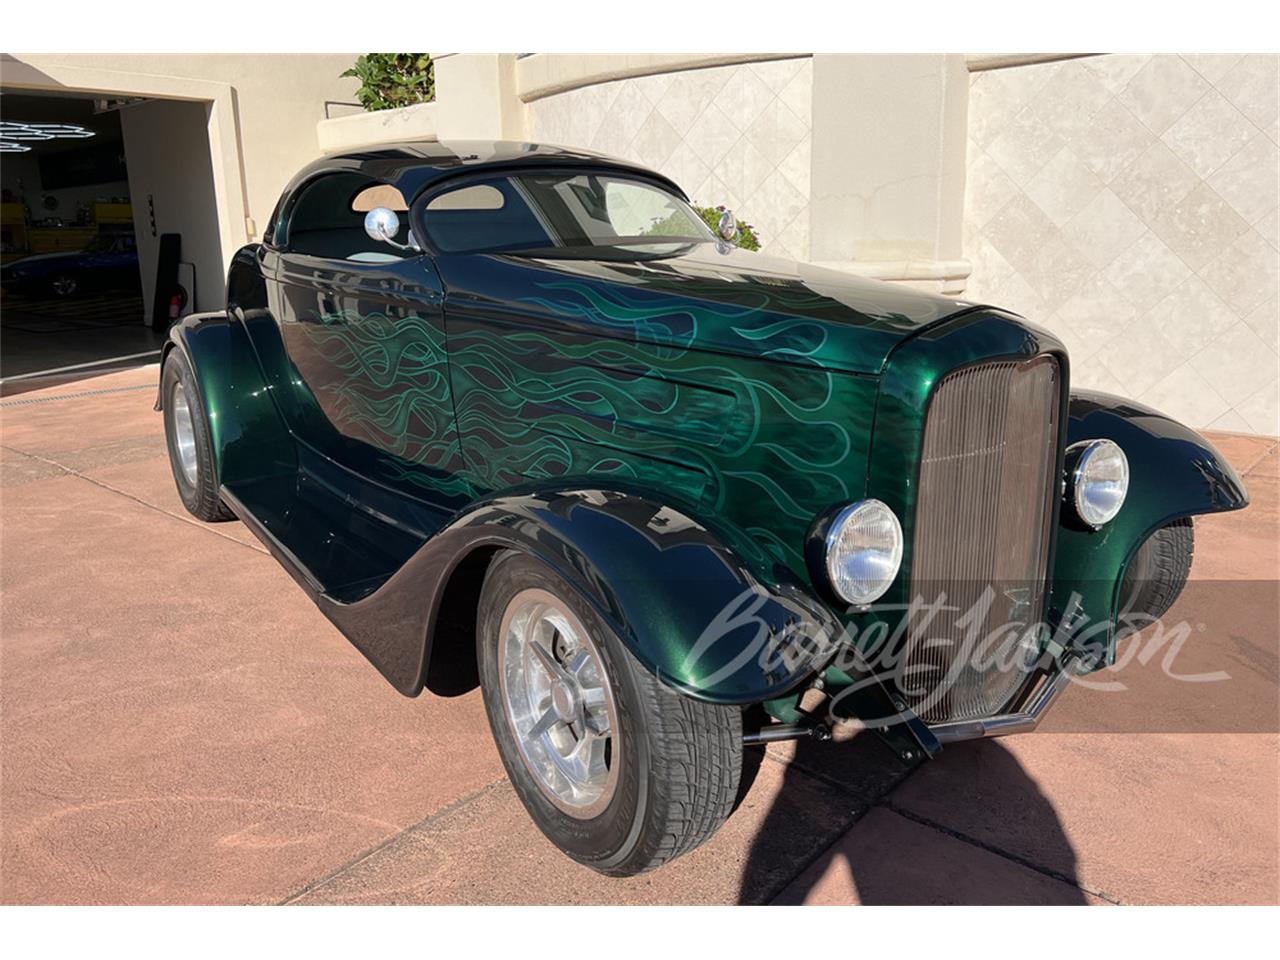 For Sale at Auction: 1938 Ford Custom in Scottsdale, Arizona for sale in Scottsdale, AZ